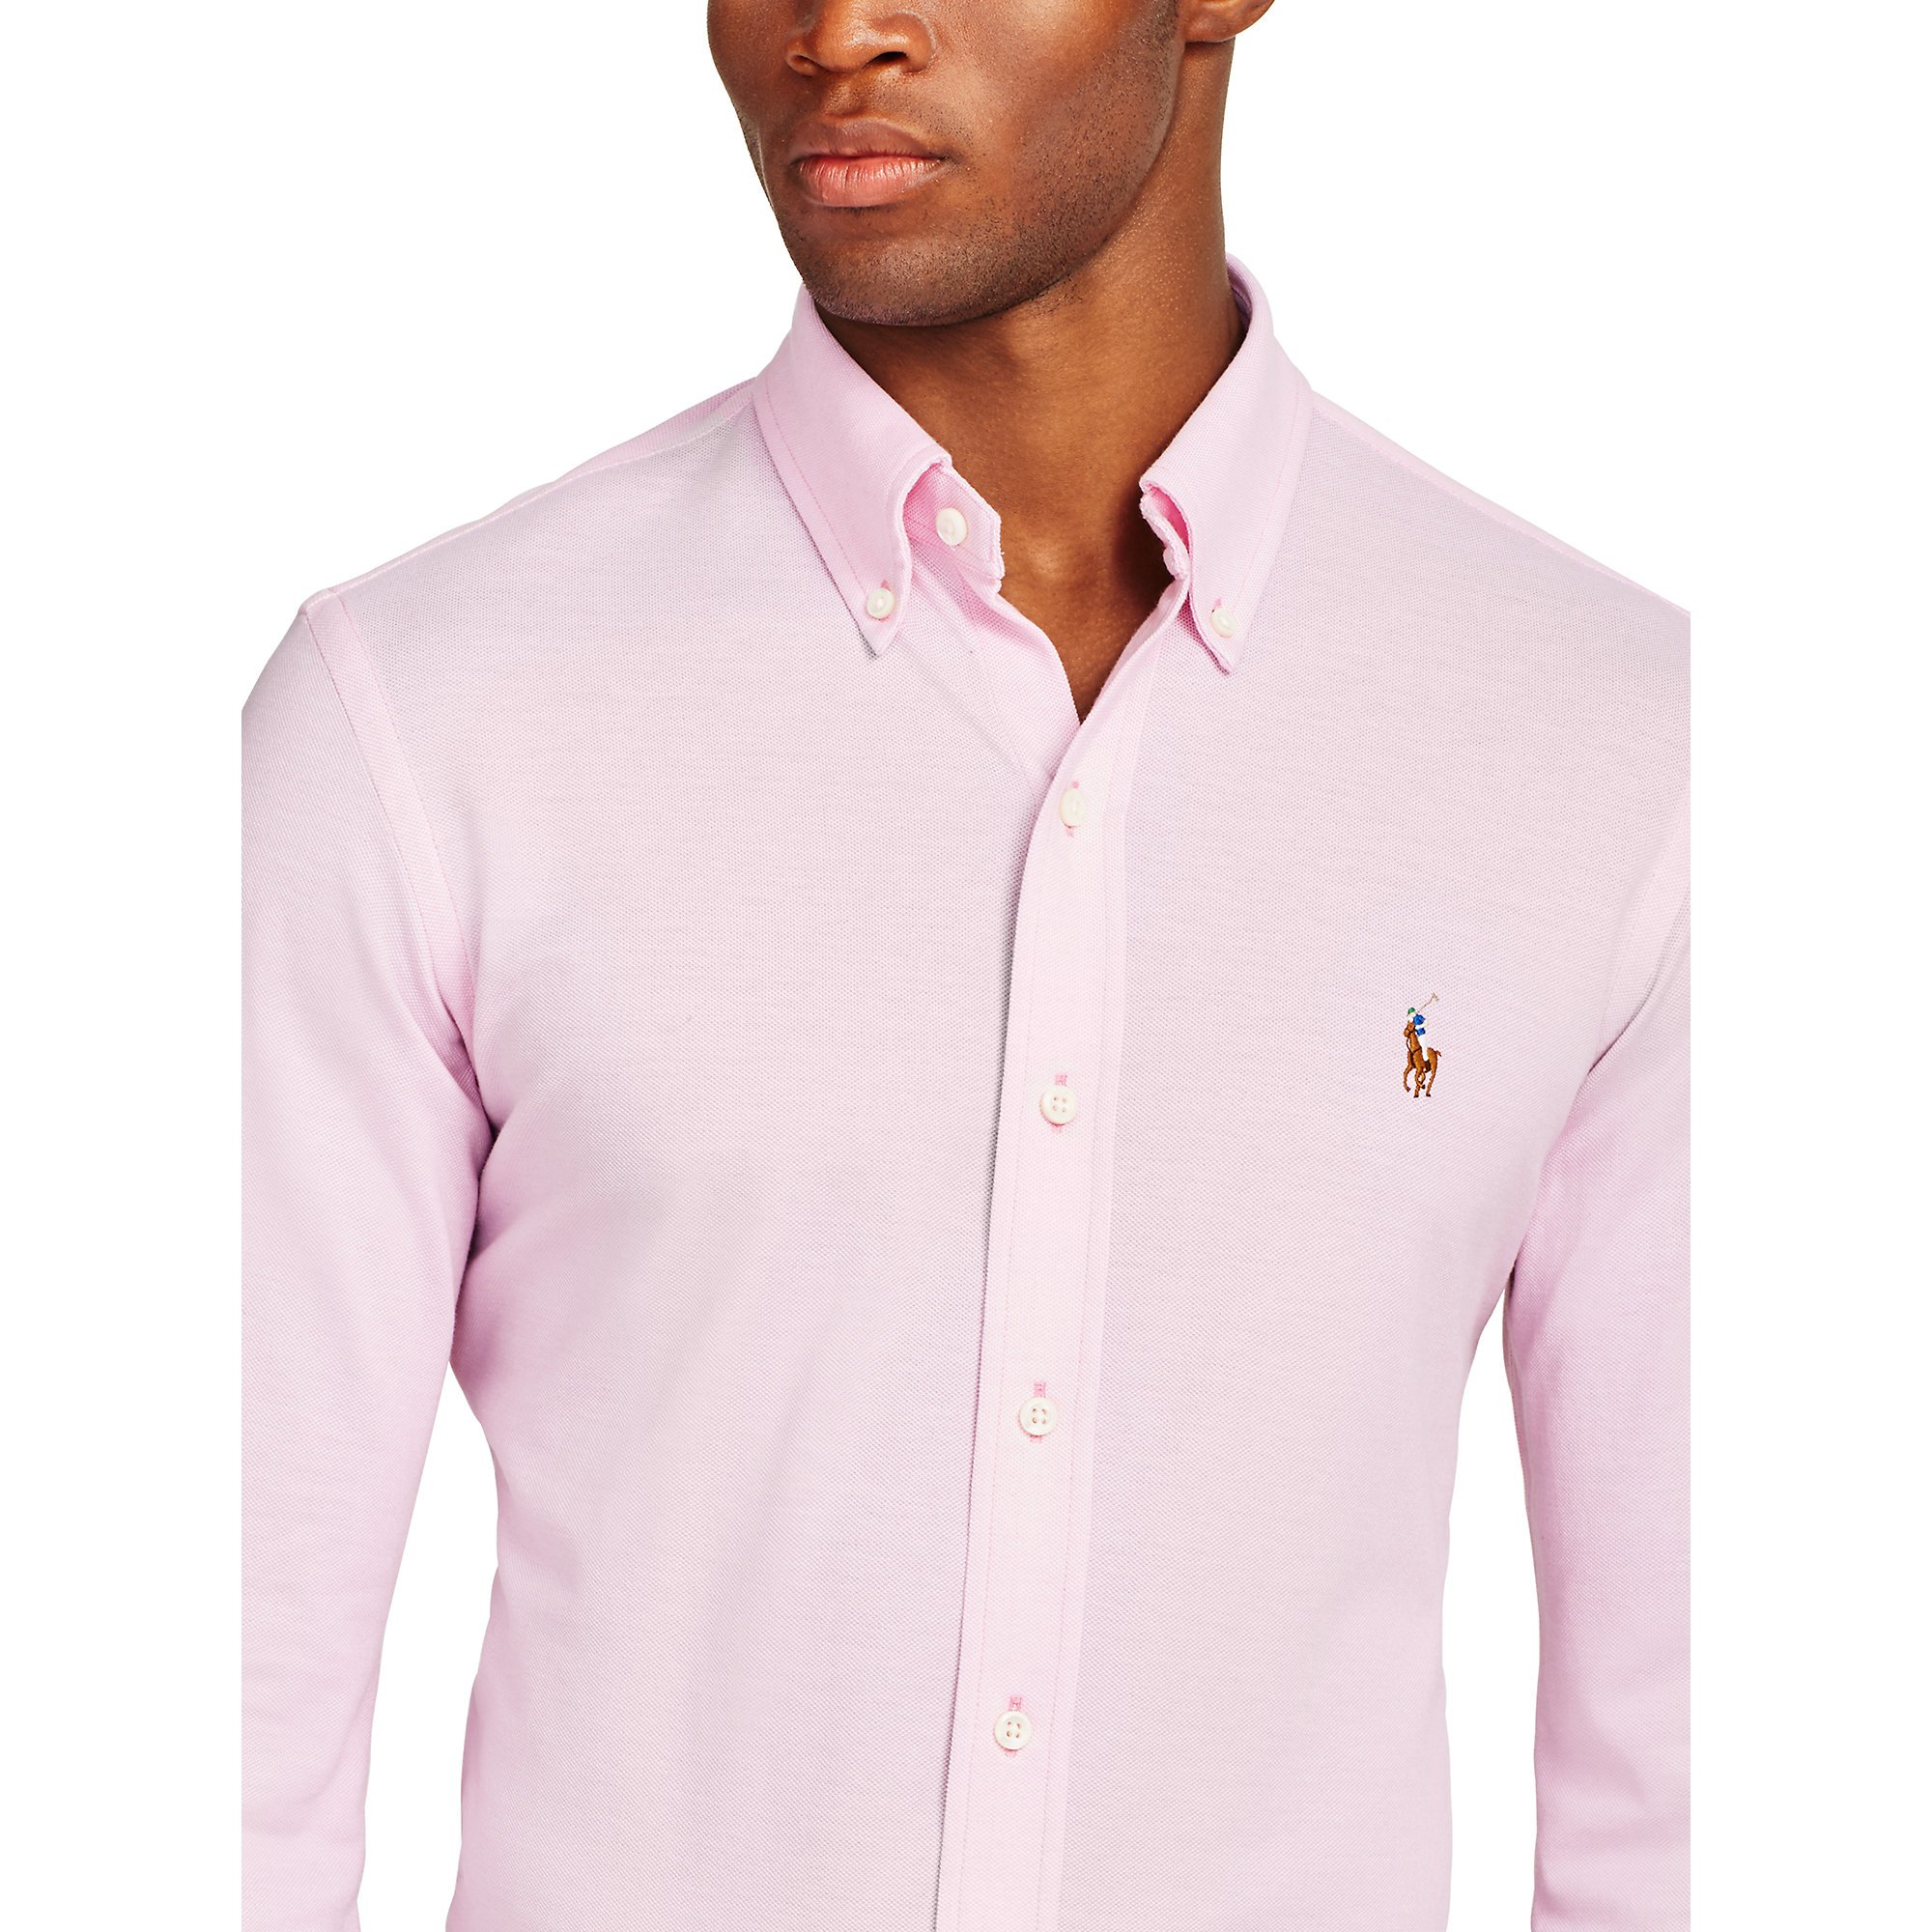 Polo Ralph Lauren Knit Oxford Shirt in Pink for Men